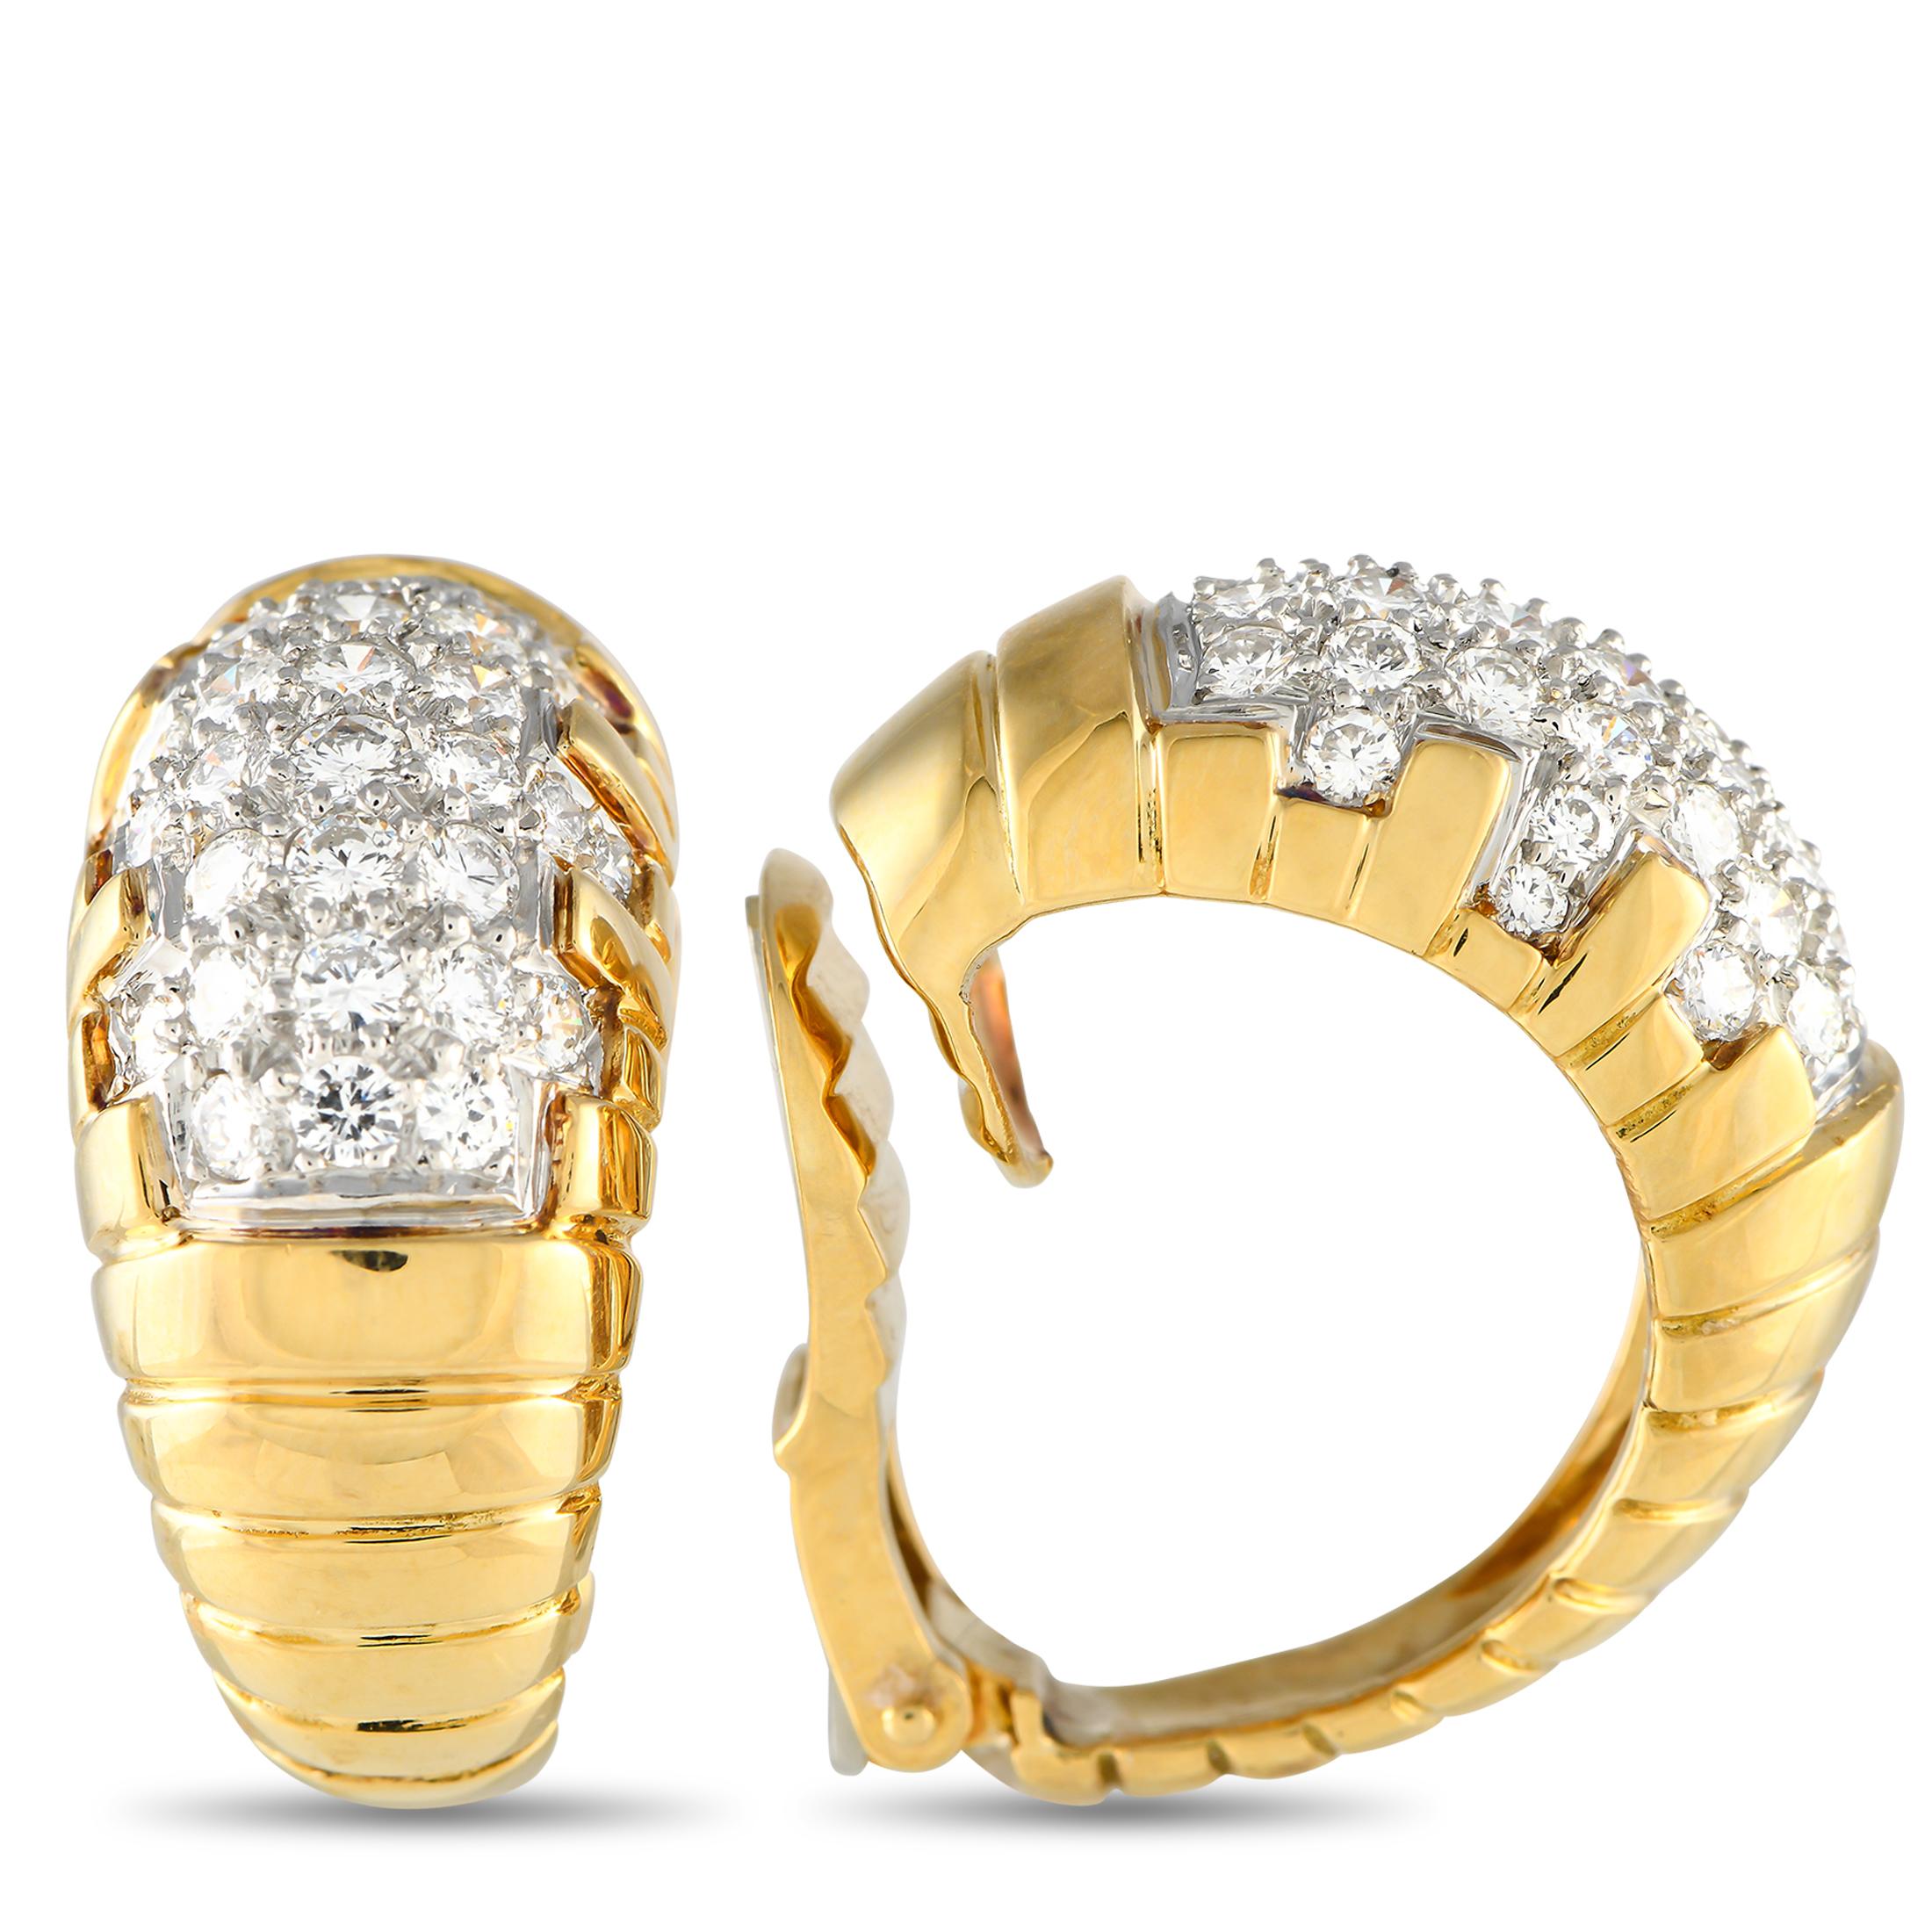 Add some vintage glam to your dressy outfits with these chunky clip-on earrings. Clad in 18K yellow gold are domed C-shaped hoops with ridged finish and pave diamonds. Each earring measures 1